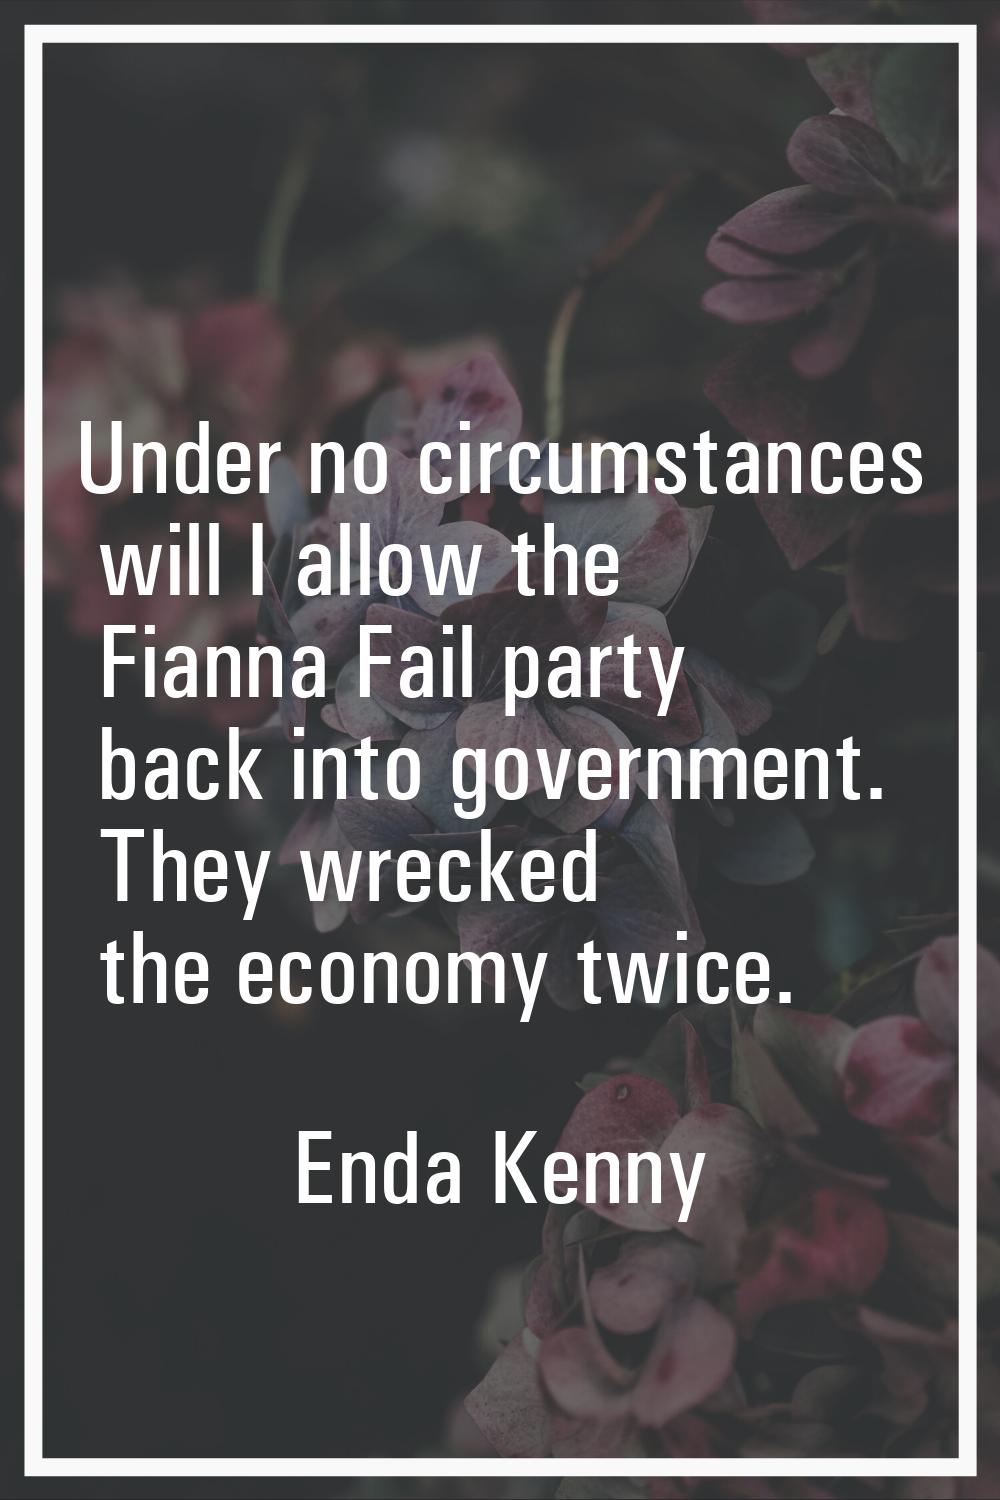 Under no circumstances will I allow the Fianna Fail party back into government. They wrecked the ec